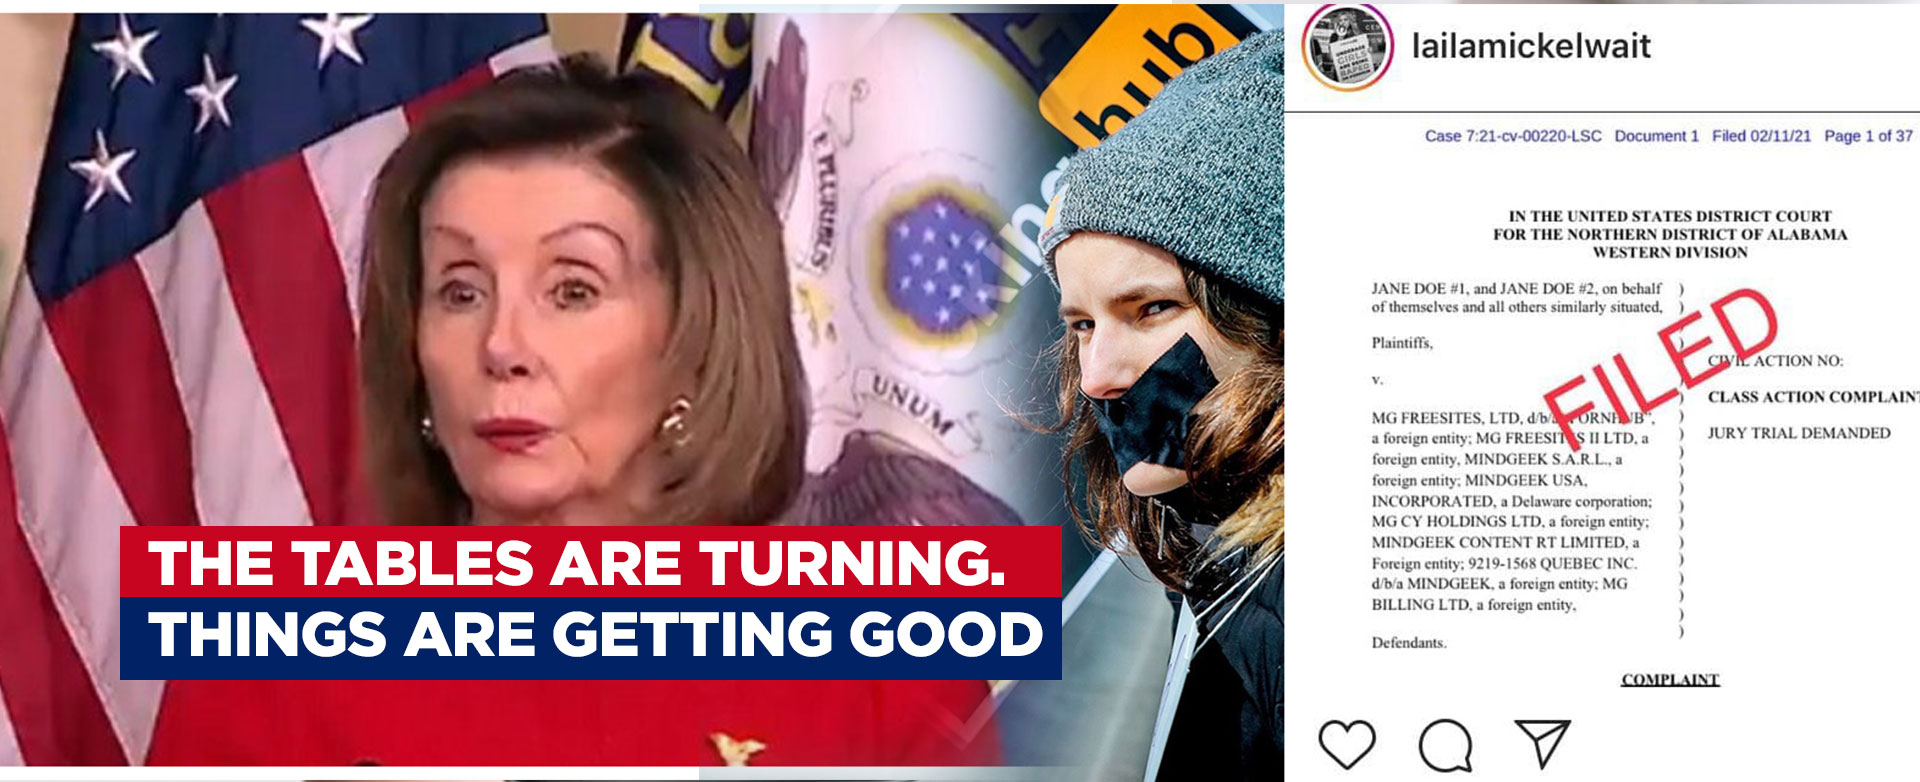 MyPatriotsNetwork-The Tables Are Turning! Things Are Getting Good February 13, 2021 Update